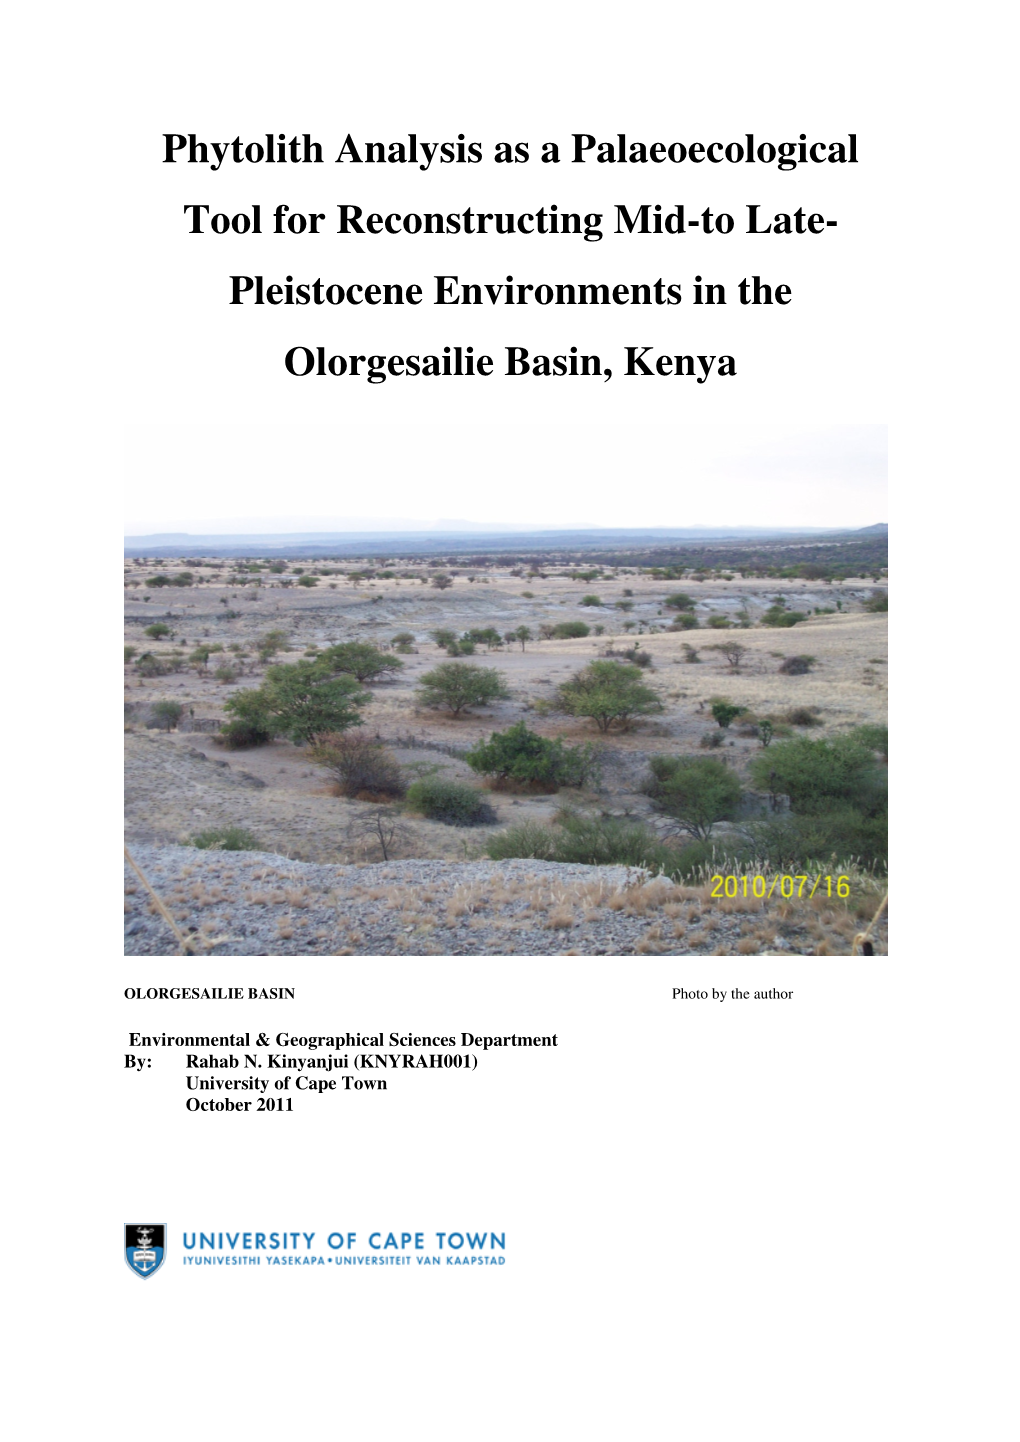 Phytolith Analysis As a Palaeoecological Tool for Reconstructing Mid-To Late- Pleistocene Environments in the Olorgesailie Basin, Kenya